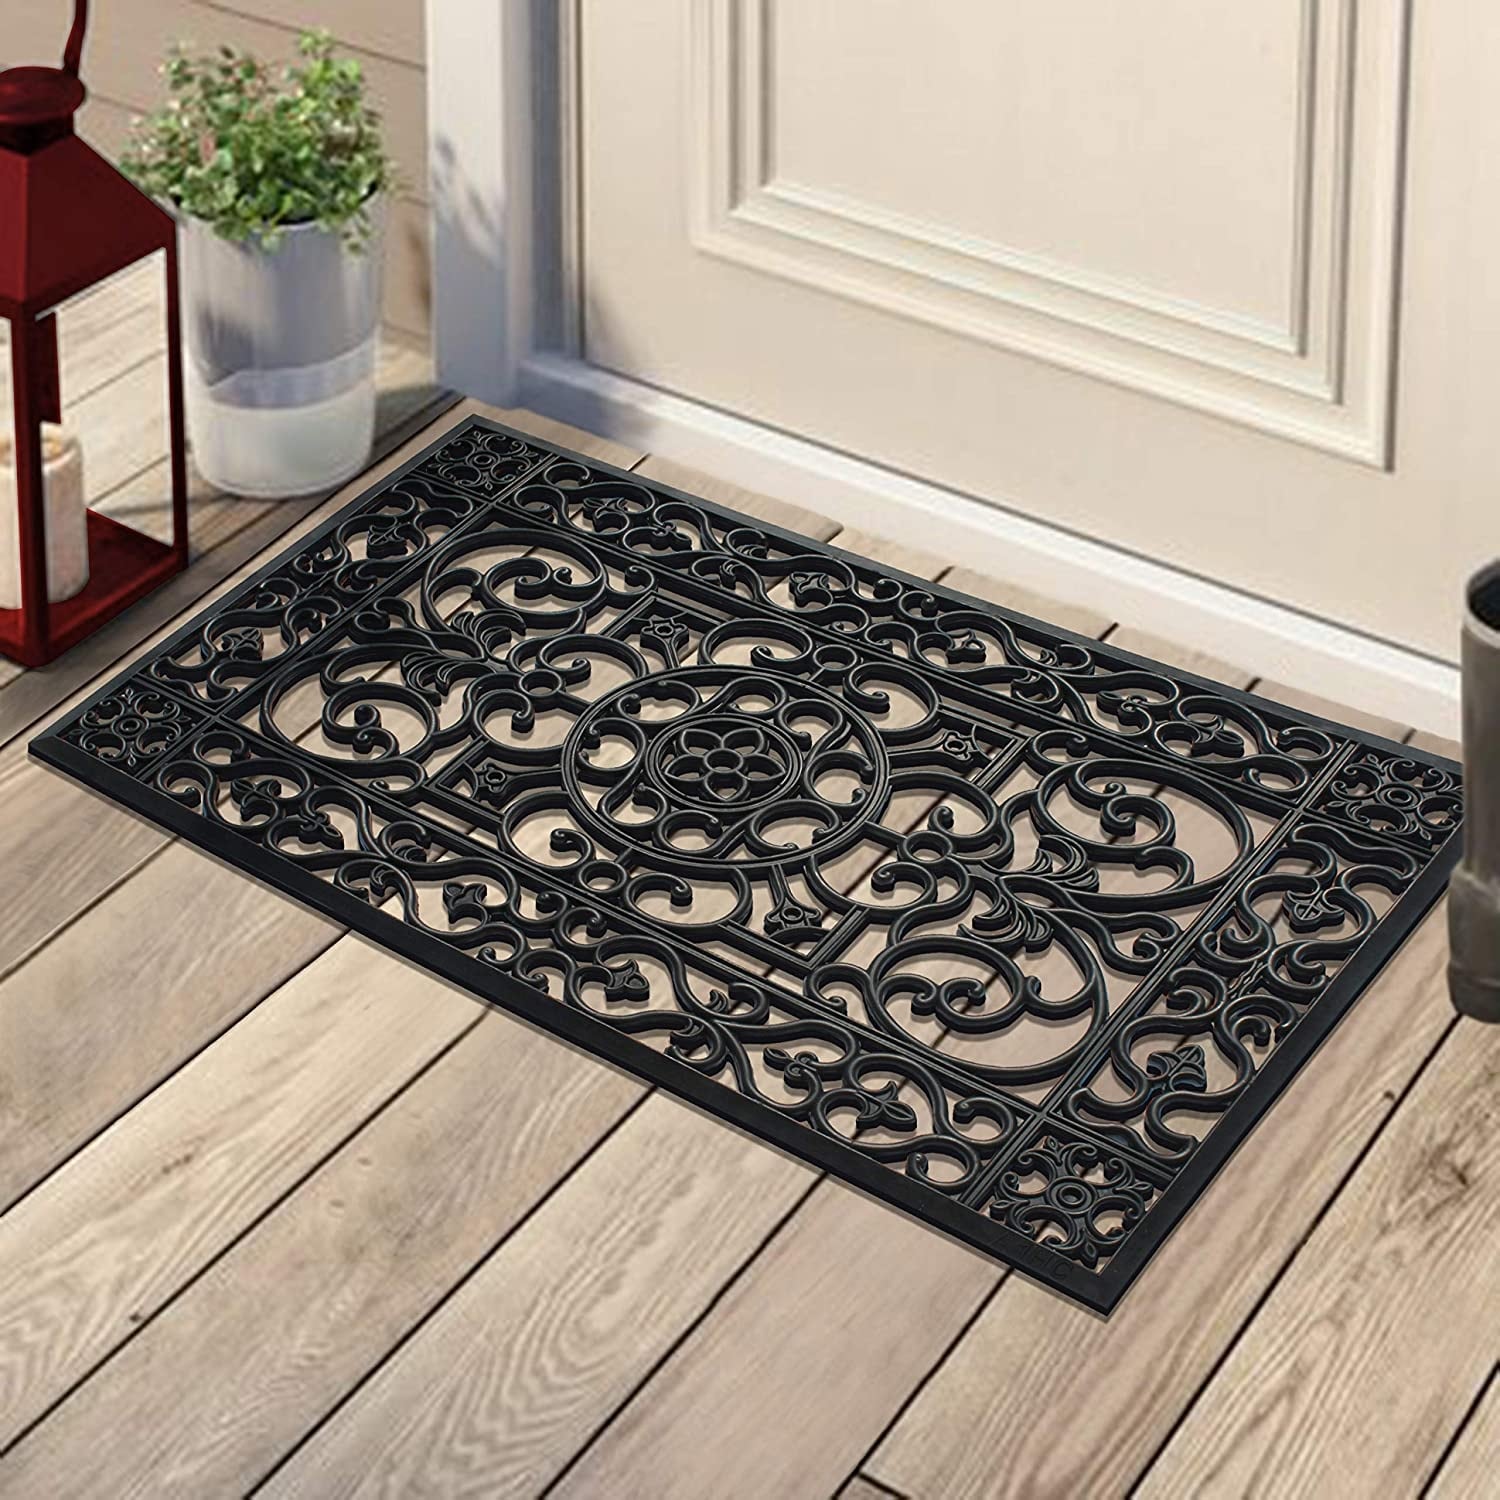 https://ak1.ostkcdn.com/images/products/is/images/direct/f60957b9b783ce58dd4f4d822171e3d86dfa10fa/A1HC-Modern-Indoor-Outdoor-Rubber-Grill-Doormat-for-Patio%2CFront-Door%2CAll-Weather-Exterior--Large-Size-For-Double-%26-single-Doors.jpg